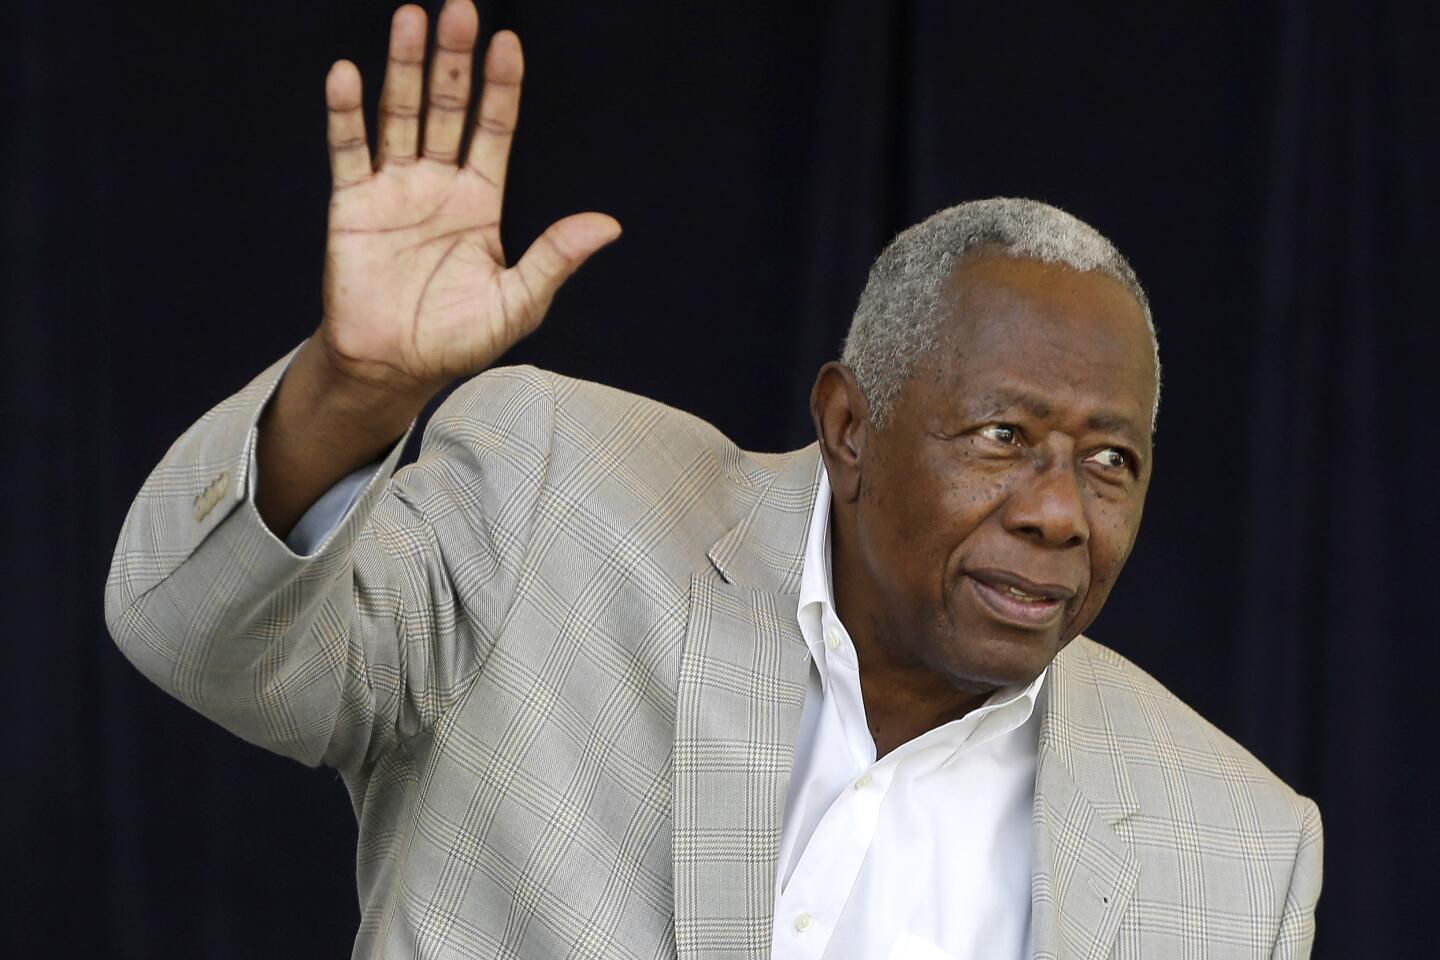 Hank Aaron shared how he wanted to be remembered in 2020 TODAY